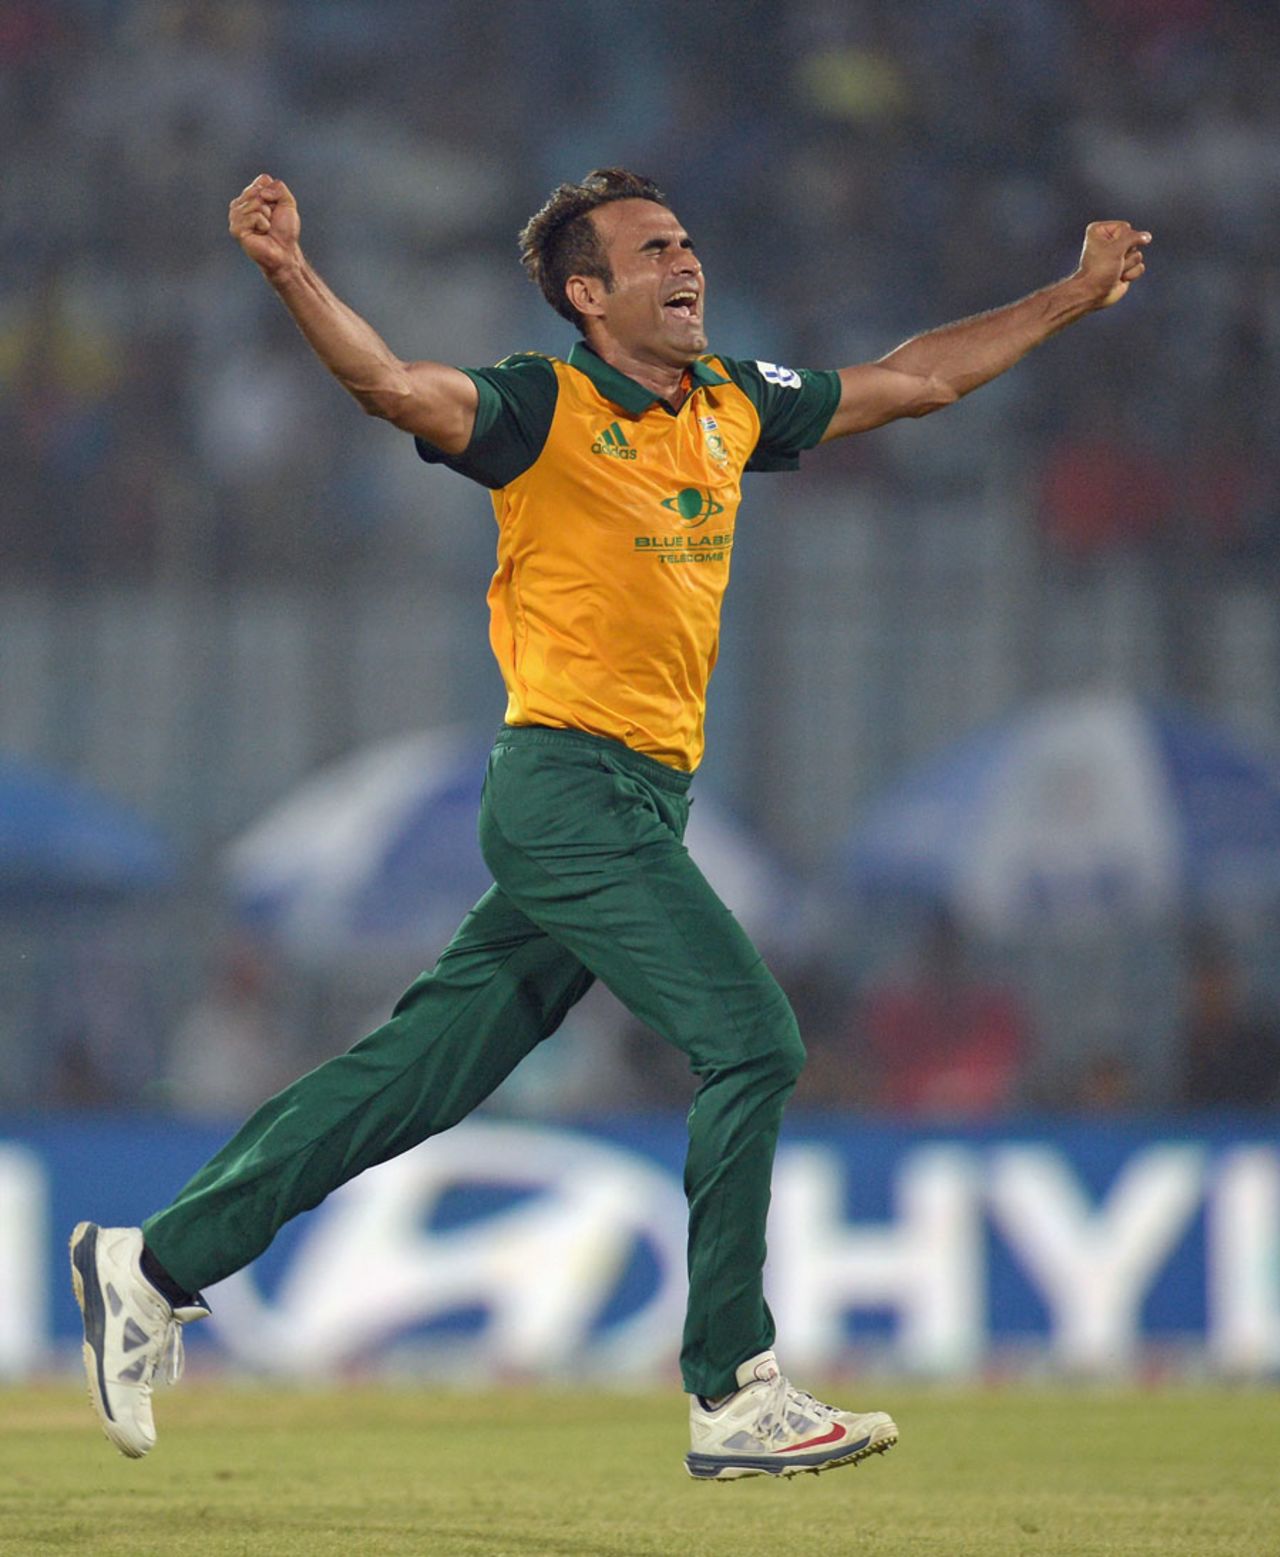 Imran Tahir celebrates Tom Cooper's wicket, Netherlands v South Africa, World T20, Group 1, Chittagong, March 27, 2014